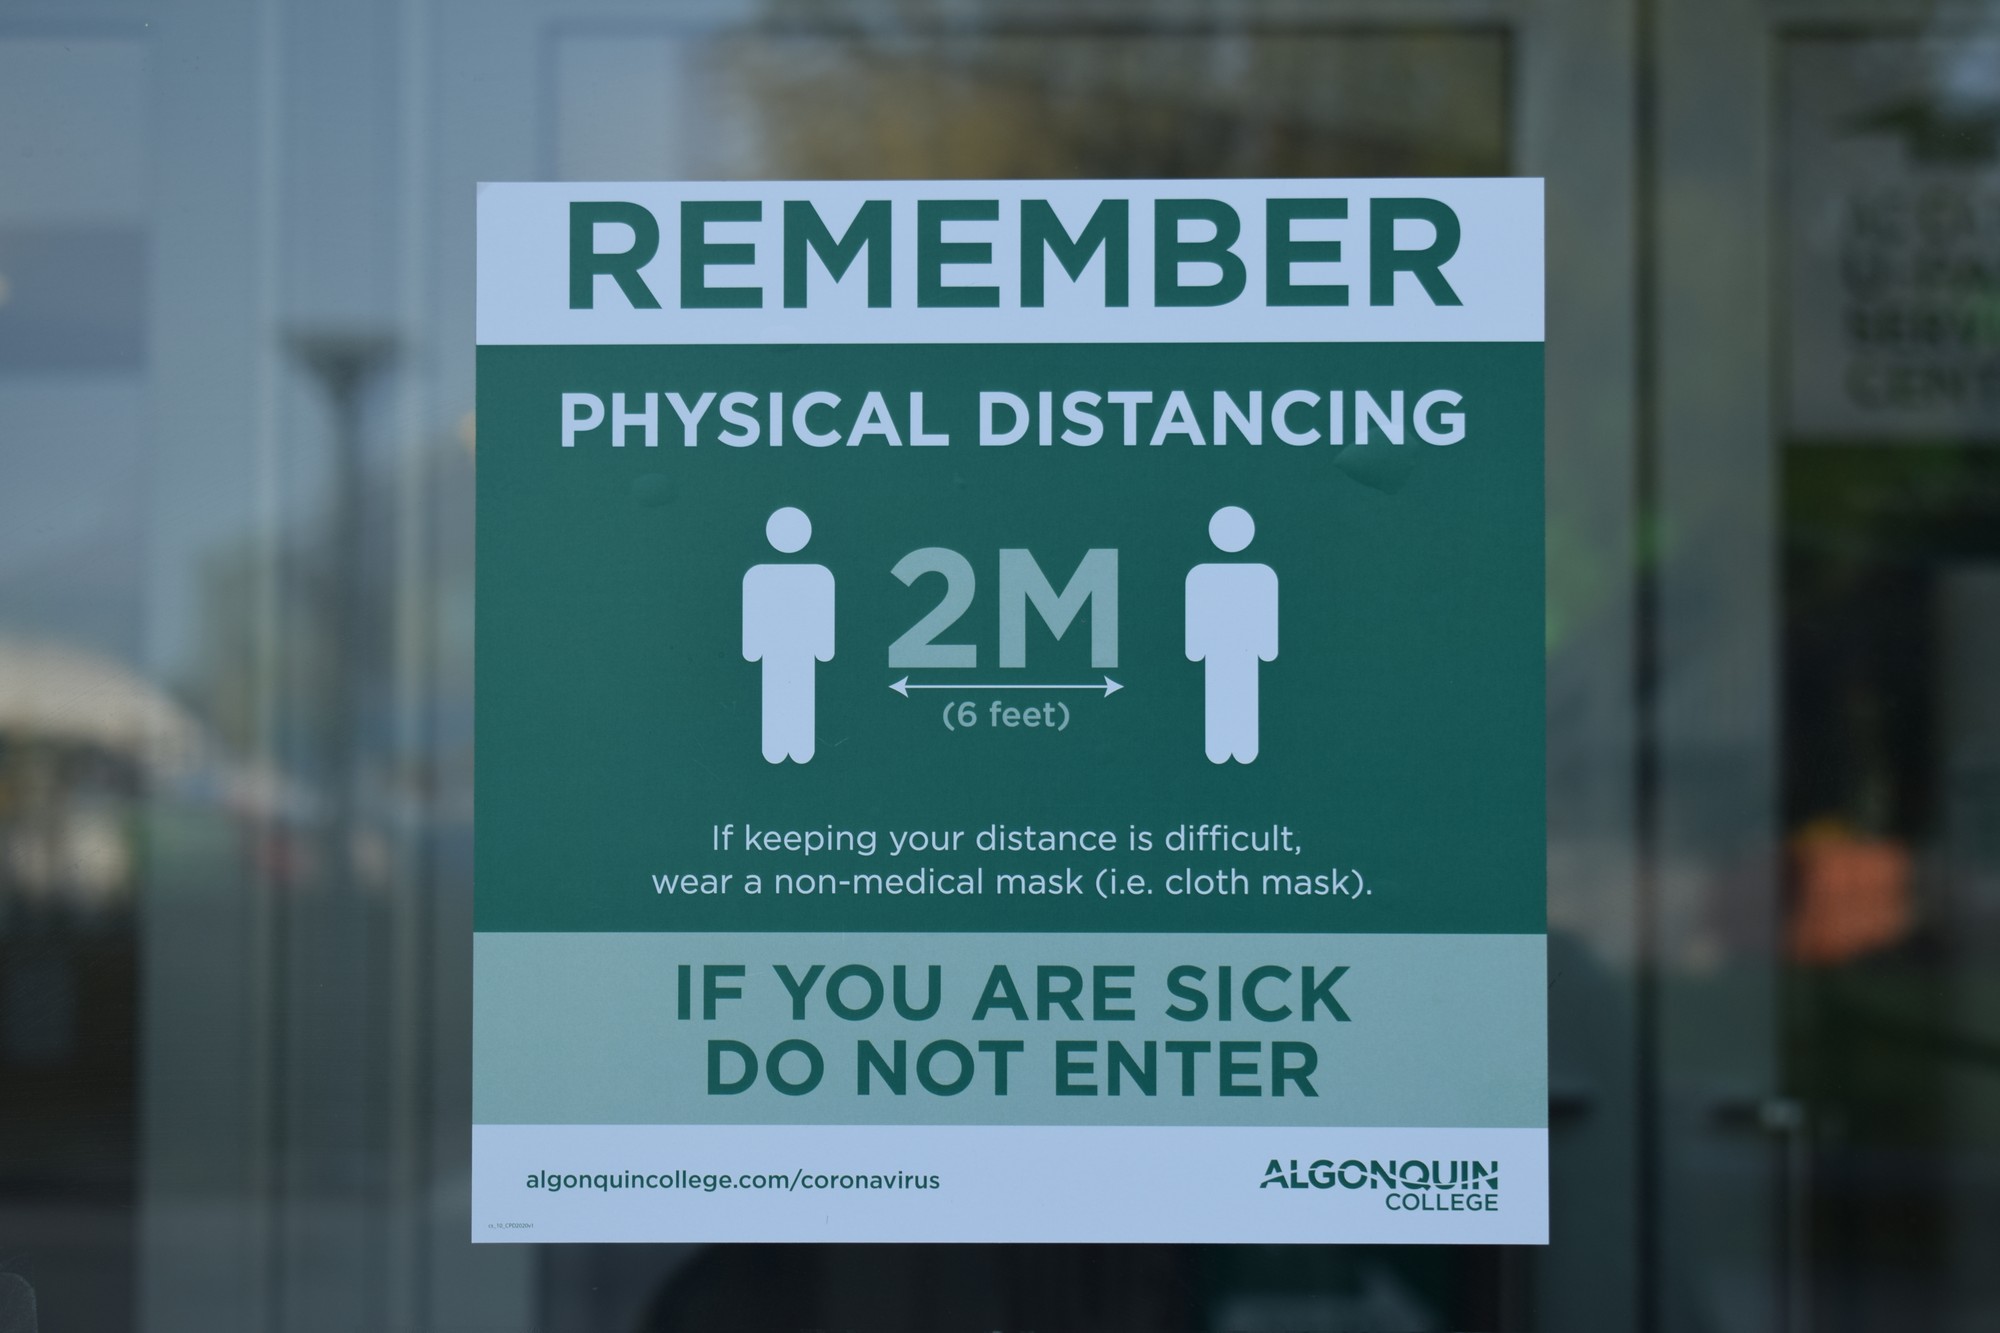 Signs around campus encourage students to practice physical distancing and to stay home when feeling sick